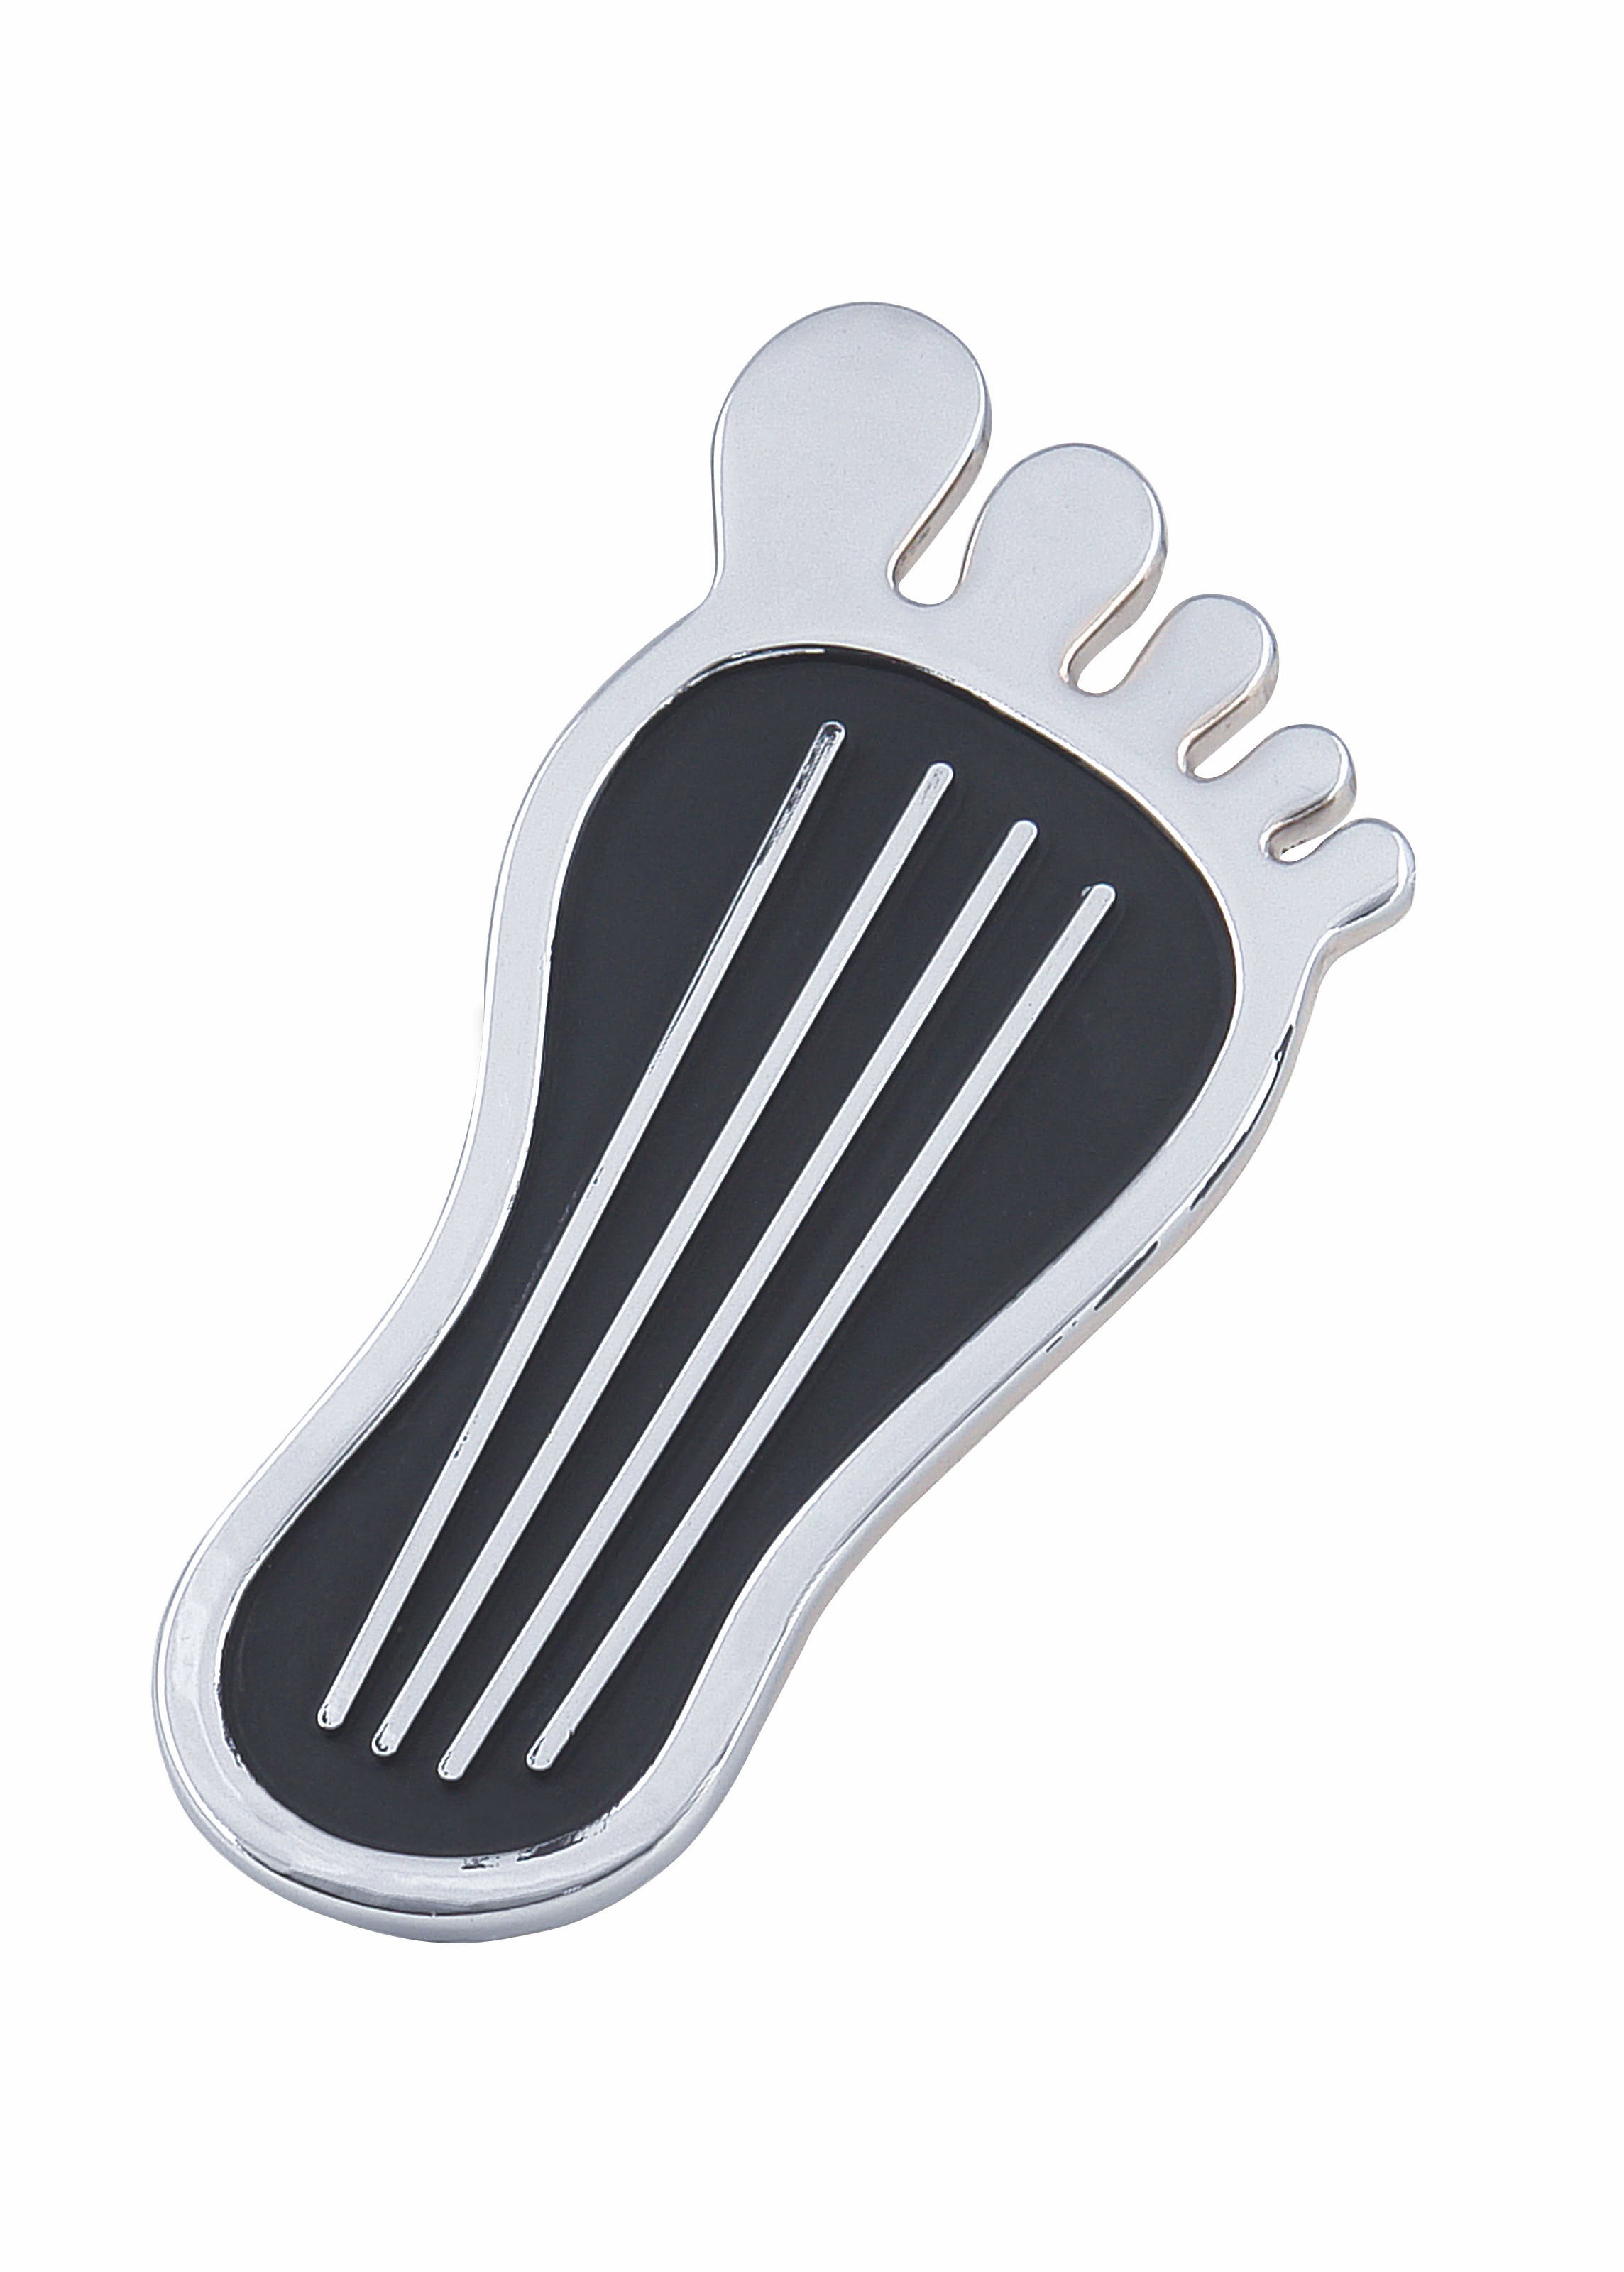 Mr. Gasket 9645 GAS,PEDAL PAD-FOOT STYLE